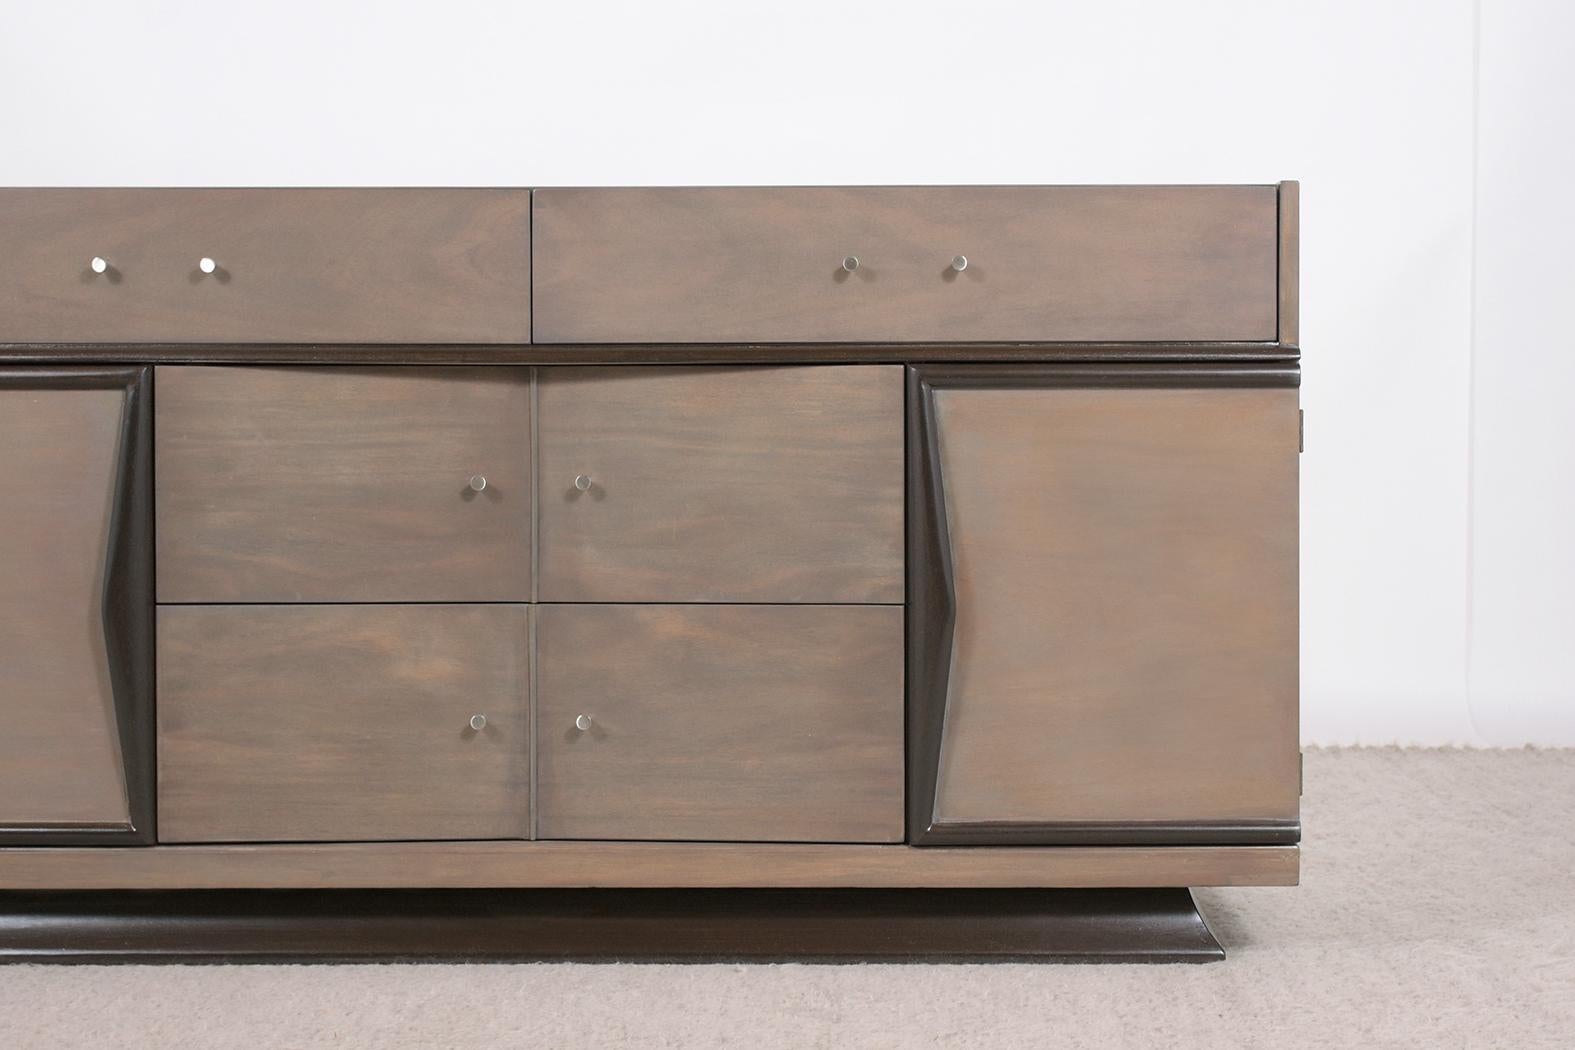 Carved Retro Chic Reimagined: Restored Modern Walnut Credenza with Grey Lacquer Finish